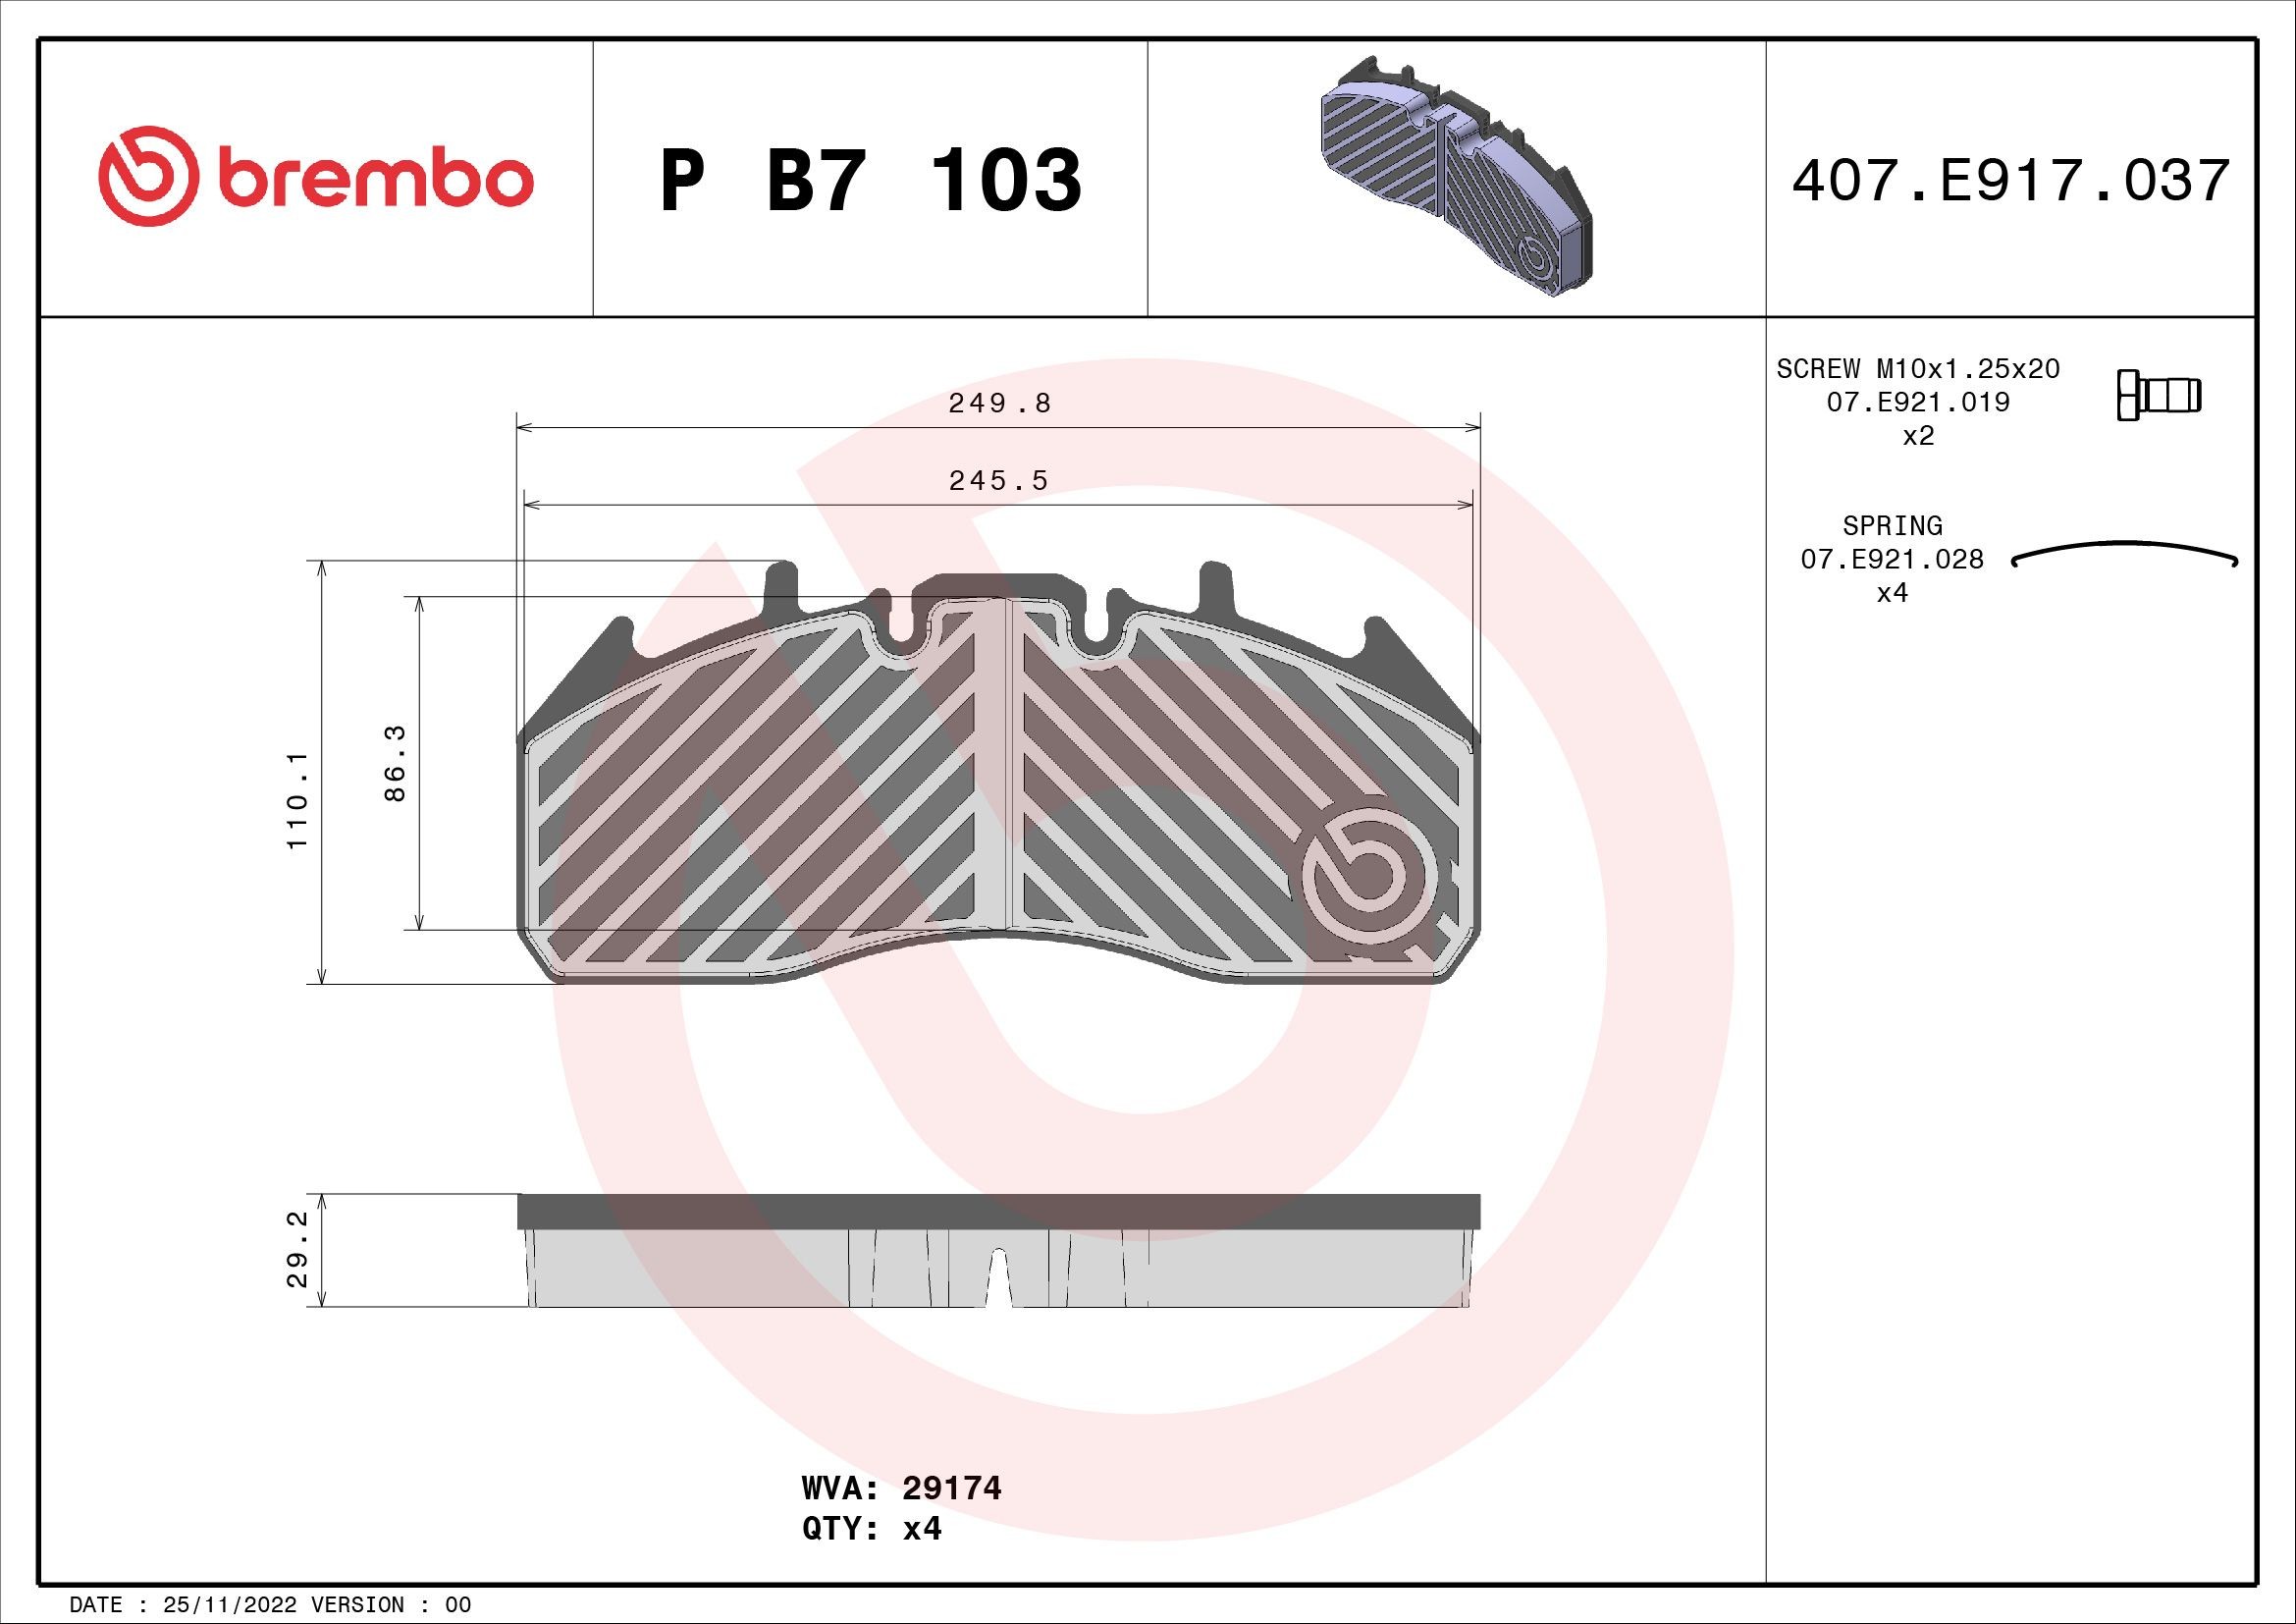 BREMBO prepared for wear indicator, with accessories Height: 110mm, Width: 250mm, Thickness: 29mm Brake pads P B7 103 buy